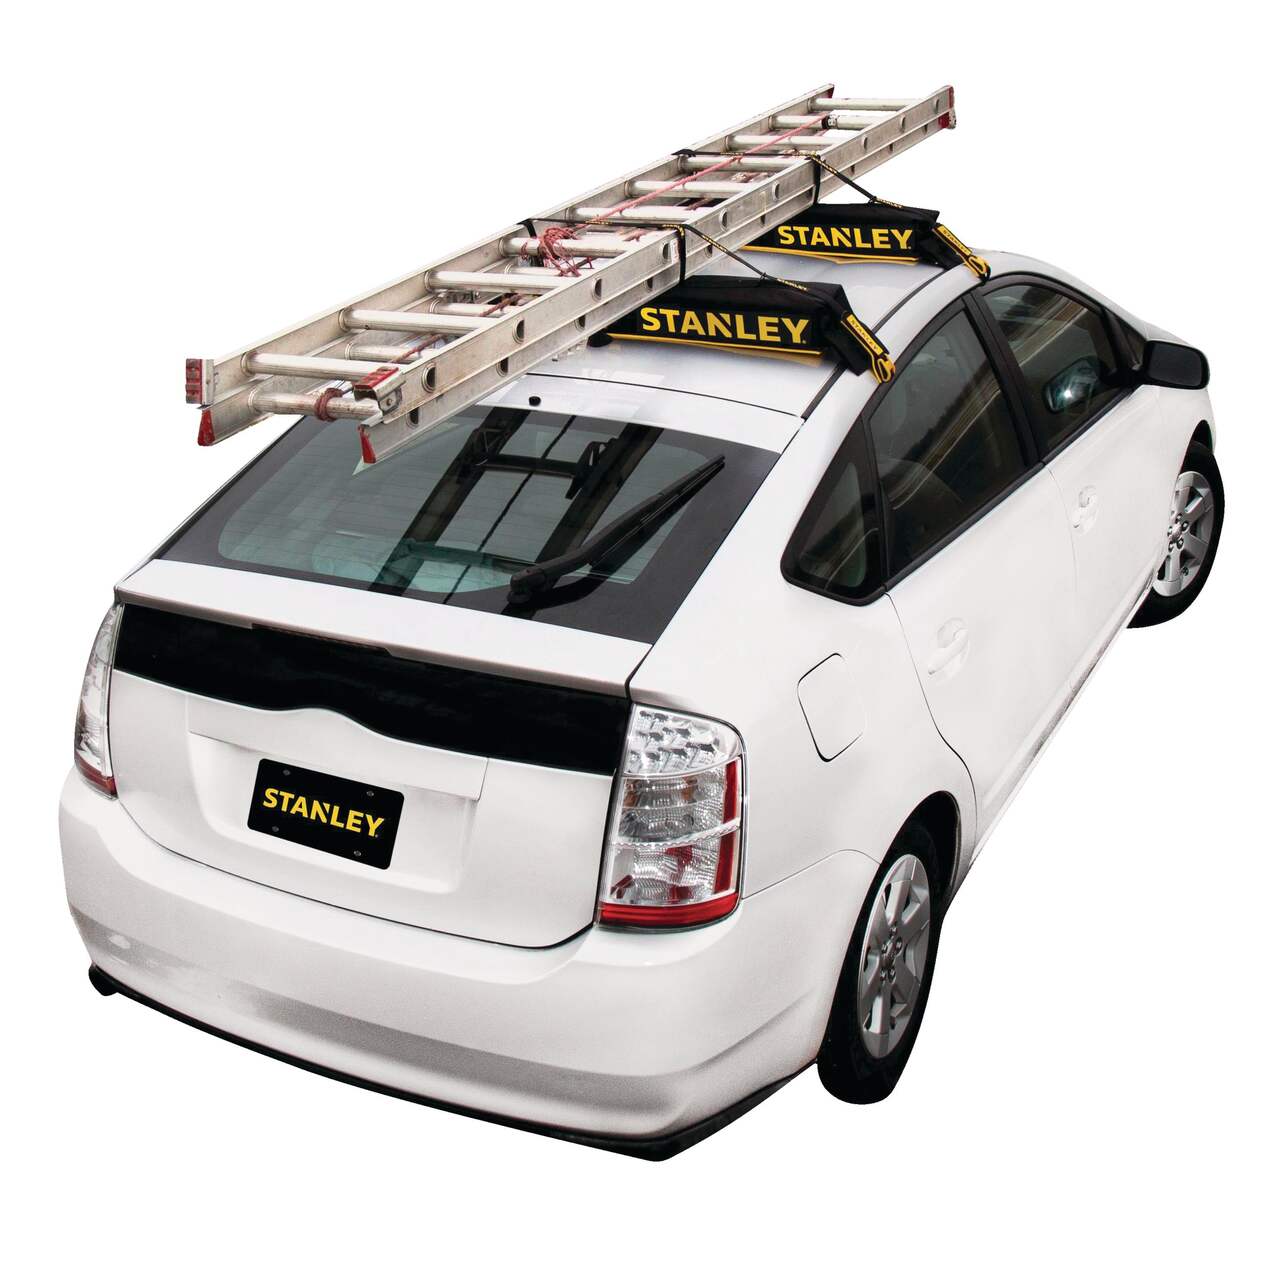 https://media-www.canadiantire.ca/product/automotive/automotive-outdoor-adventure/auto-travel-storage/0401576/stanley-roof-rack-kit-6d20d3fd-b002-49b1-8eef-bad9c16a25b1-jpgrendition.jpg?imdensity=1&imwidth=1244&impolicy=mZoom